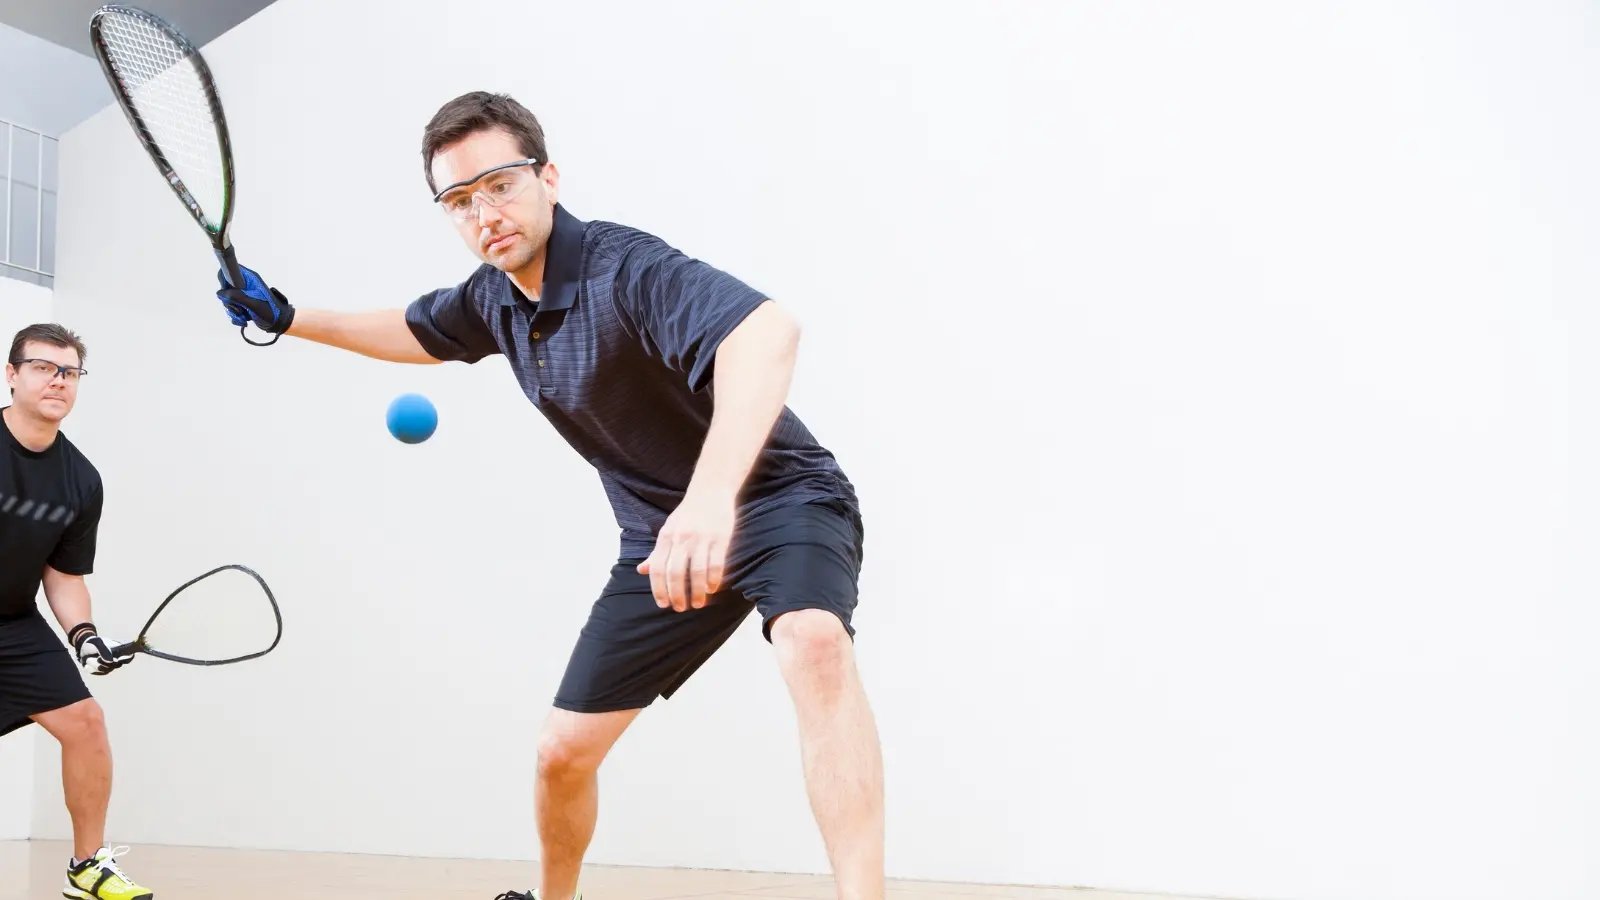 The health benefits of playing racquetball regularly